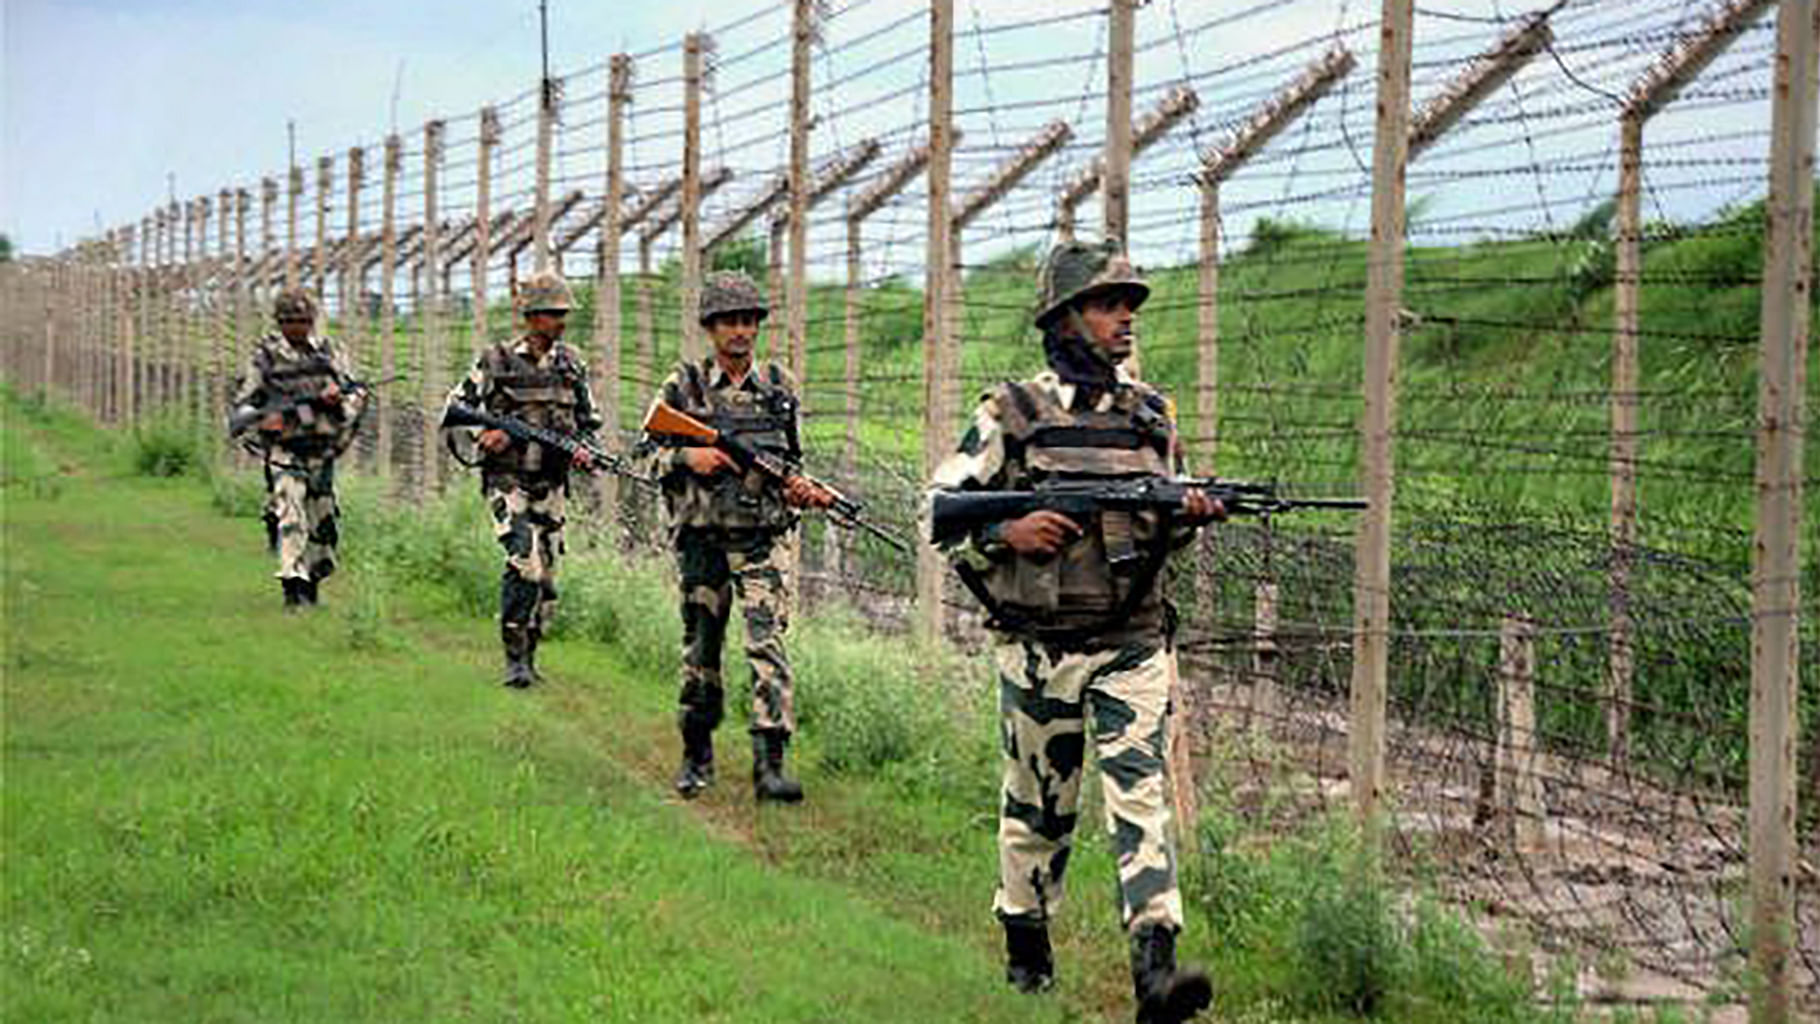  BSF jawans patrol the India-Pakistan border. Image used for representational purposes only.